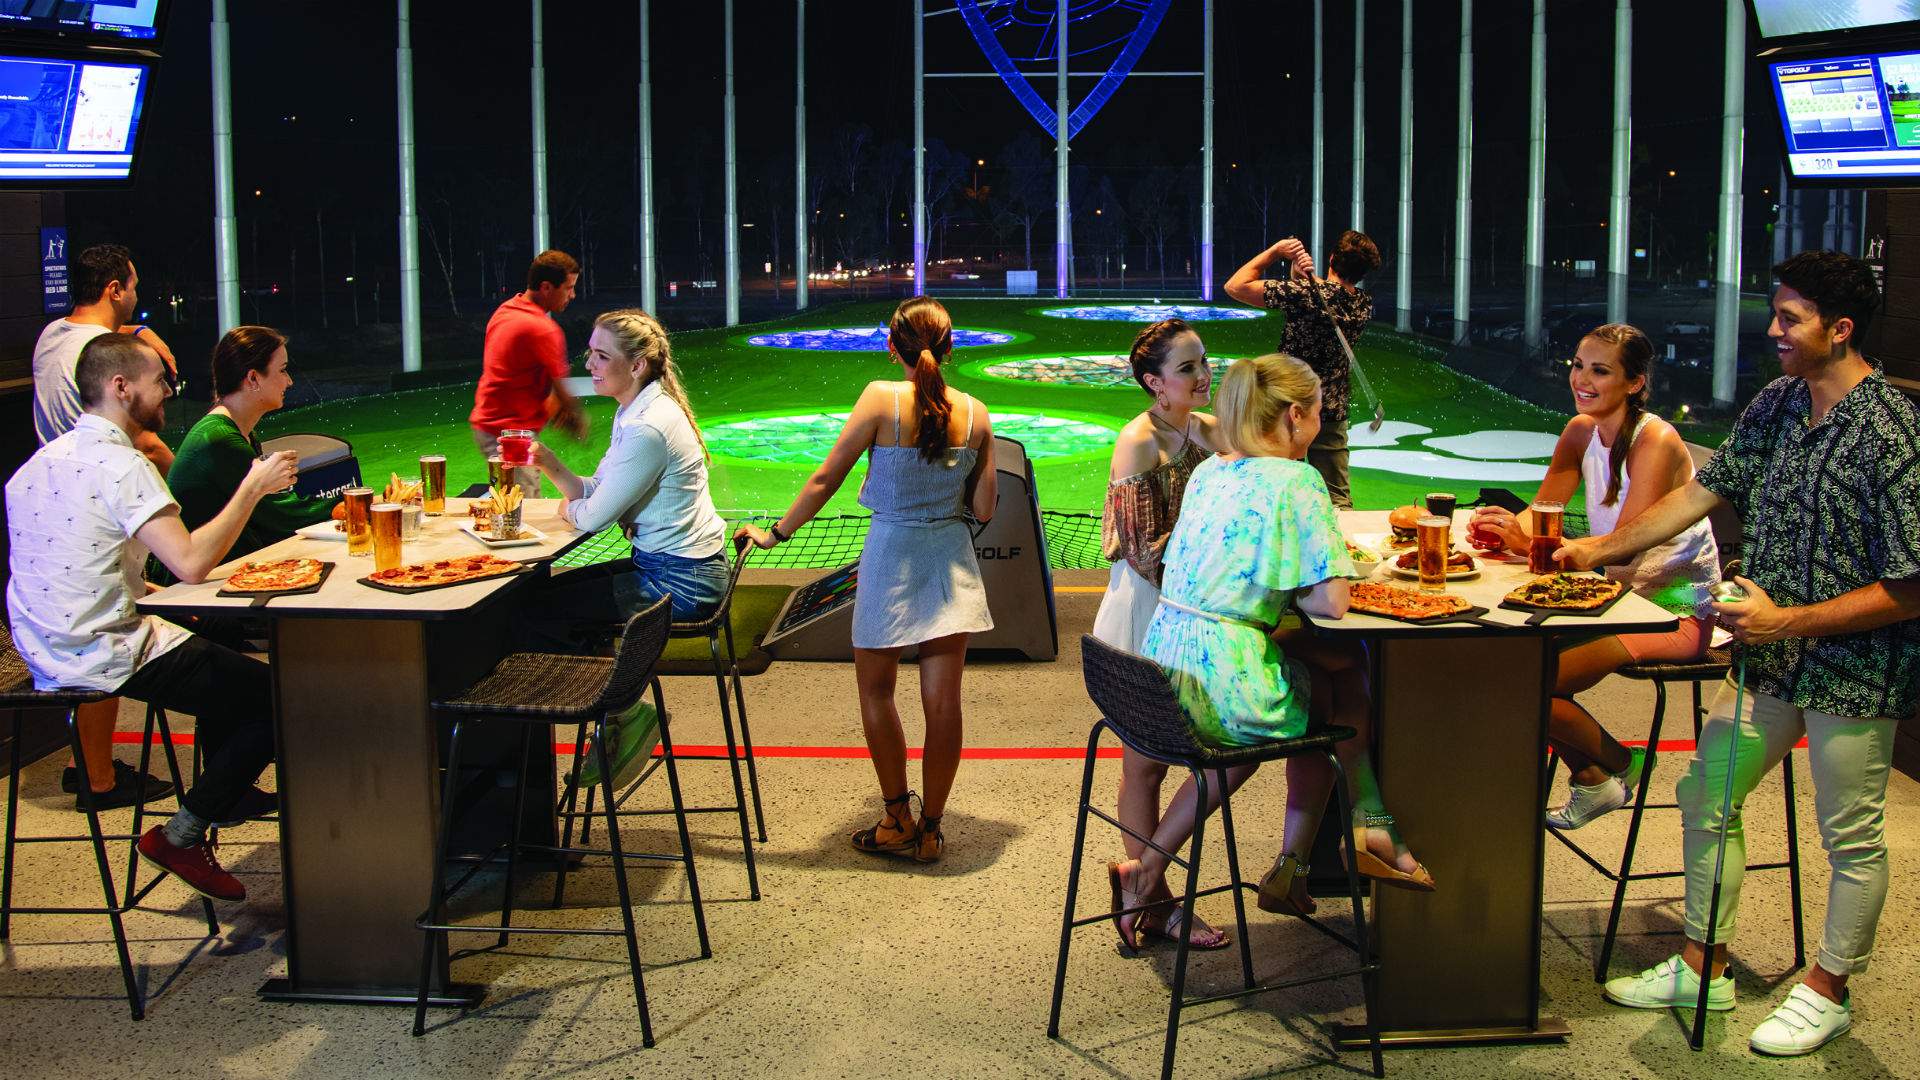 New Year's Eve at Topgolf